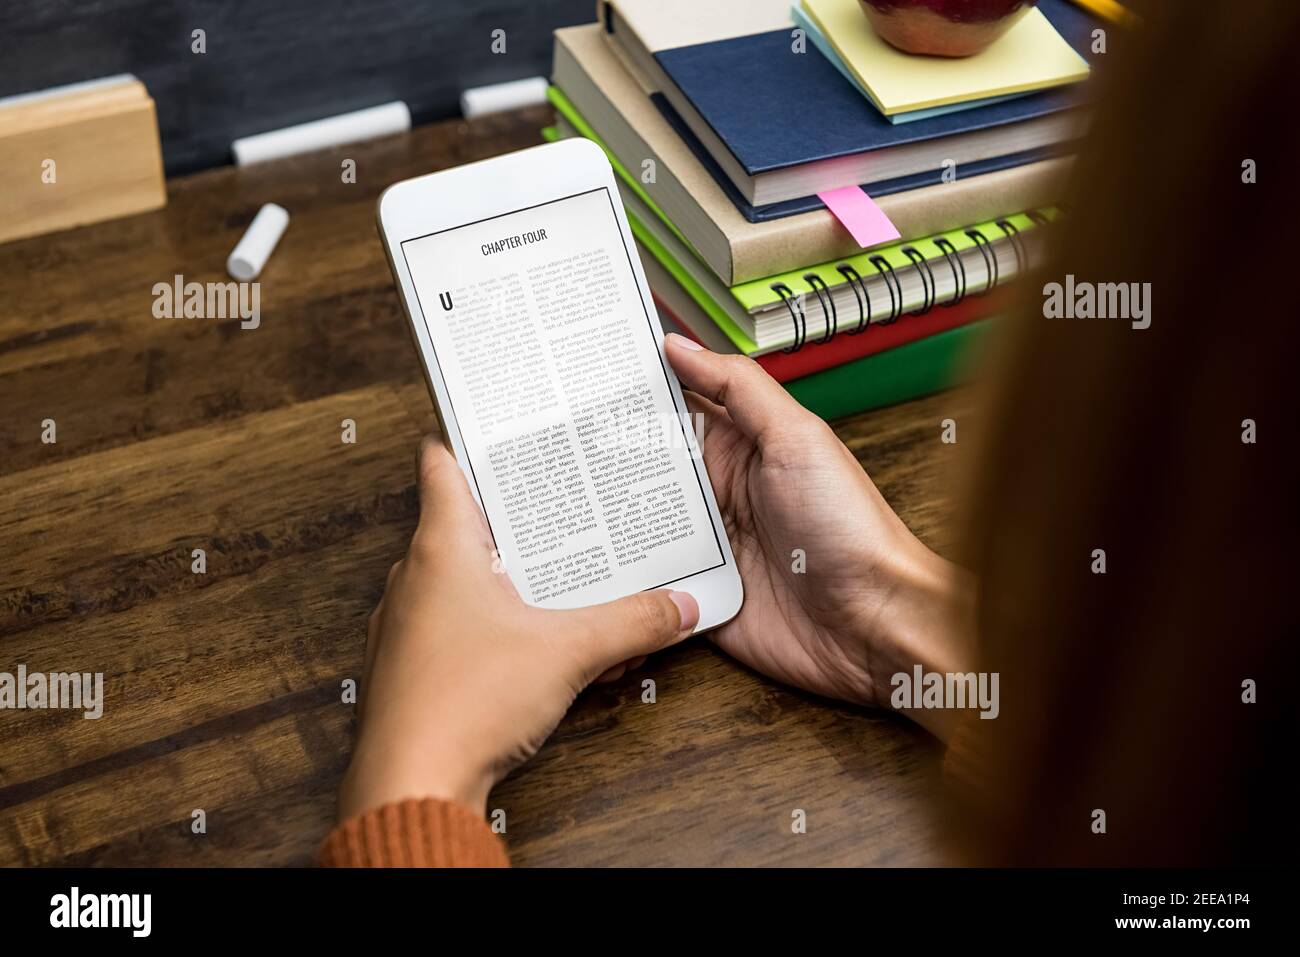 Student reading electronic book from portable digital tablet at the table Stock Photo